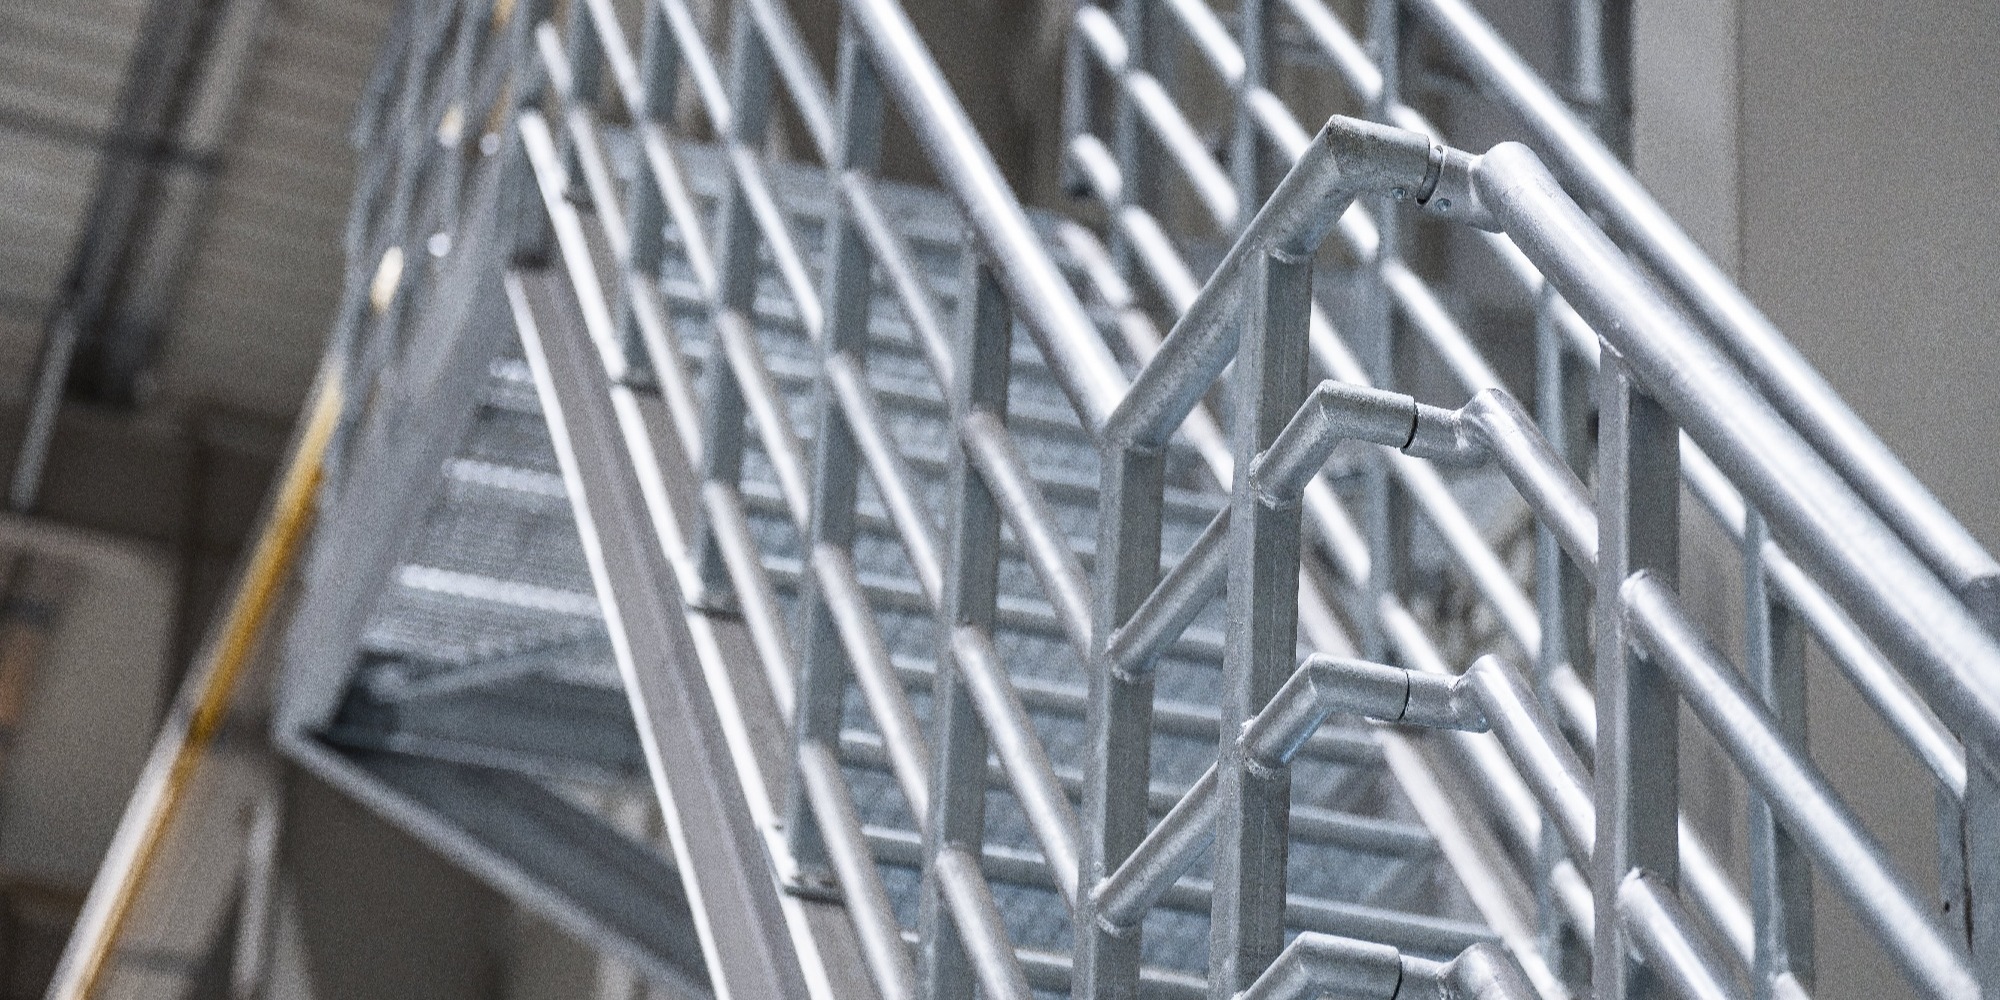 Aluminum handrail system in an industrial environment